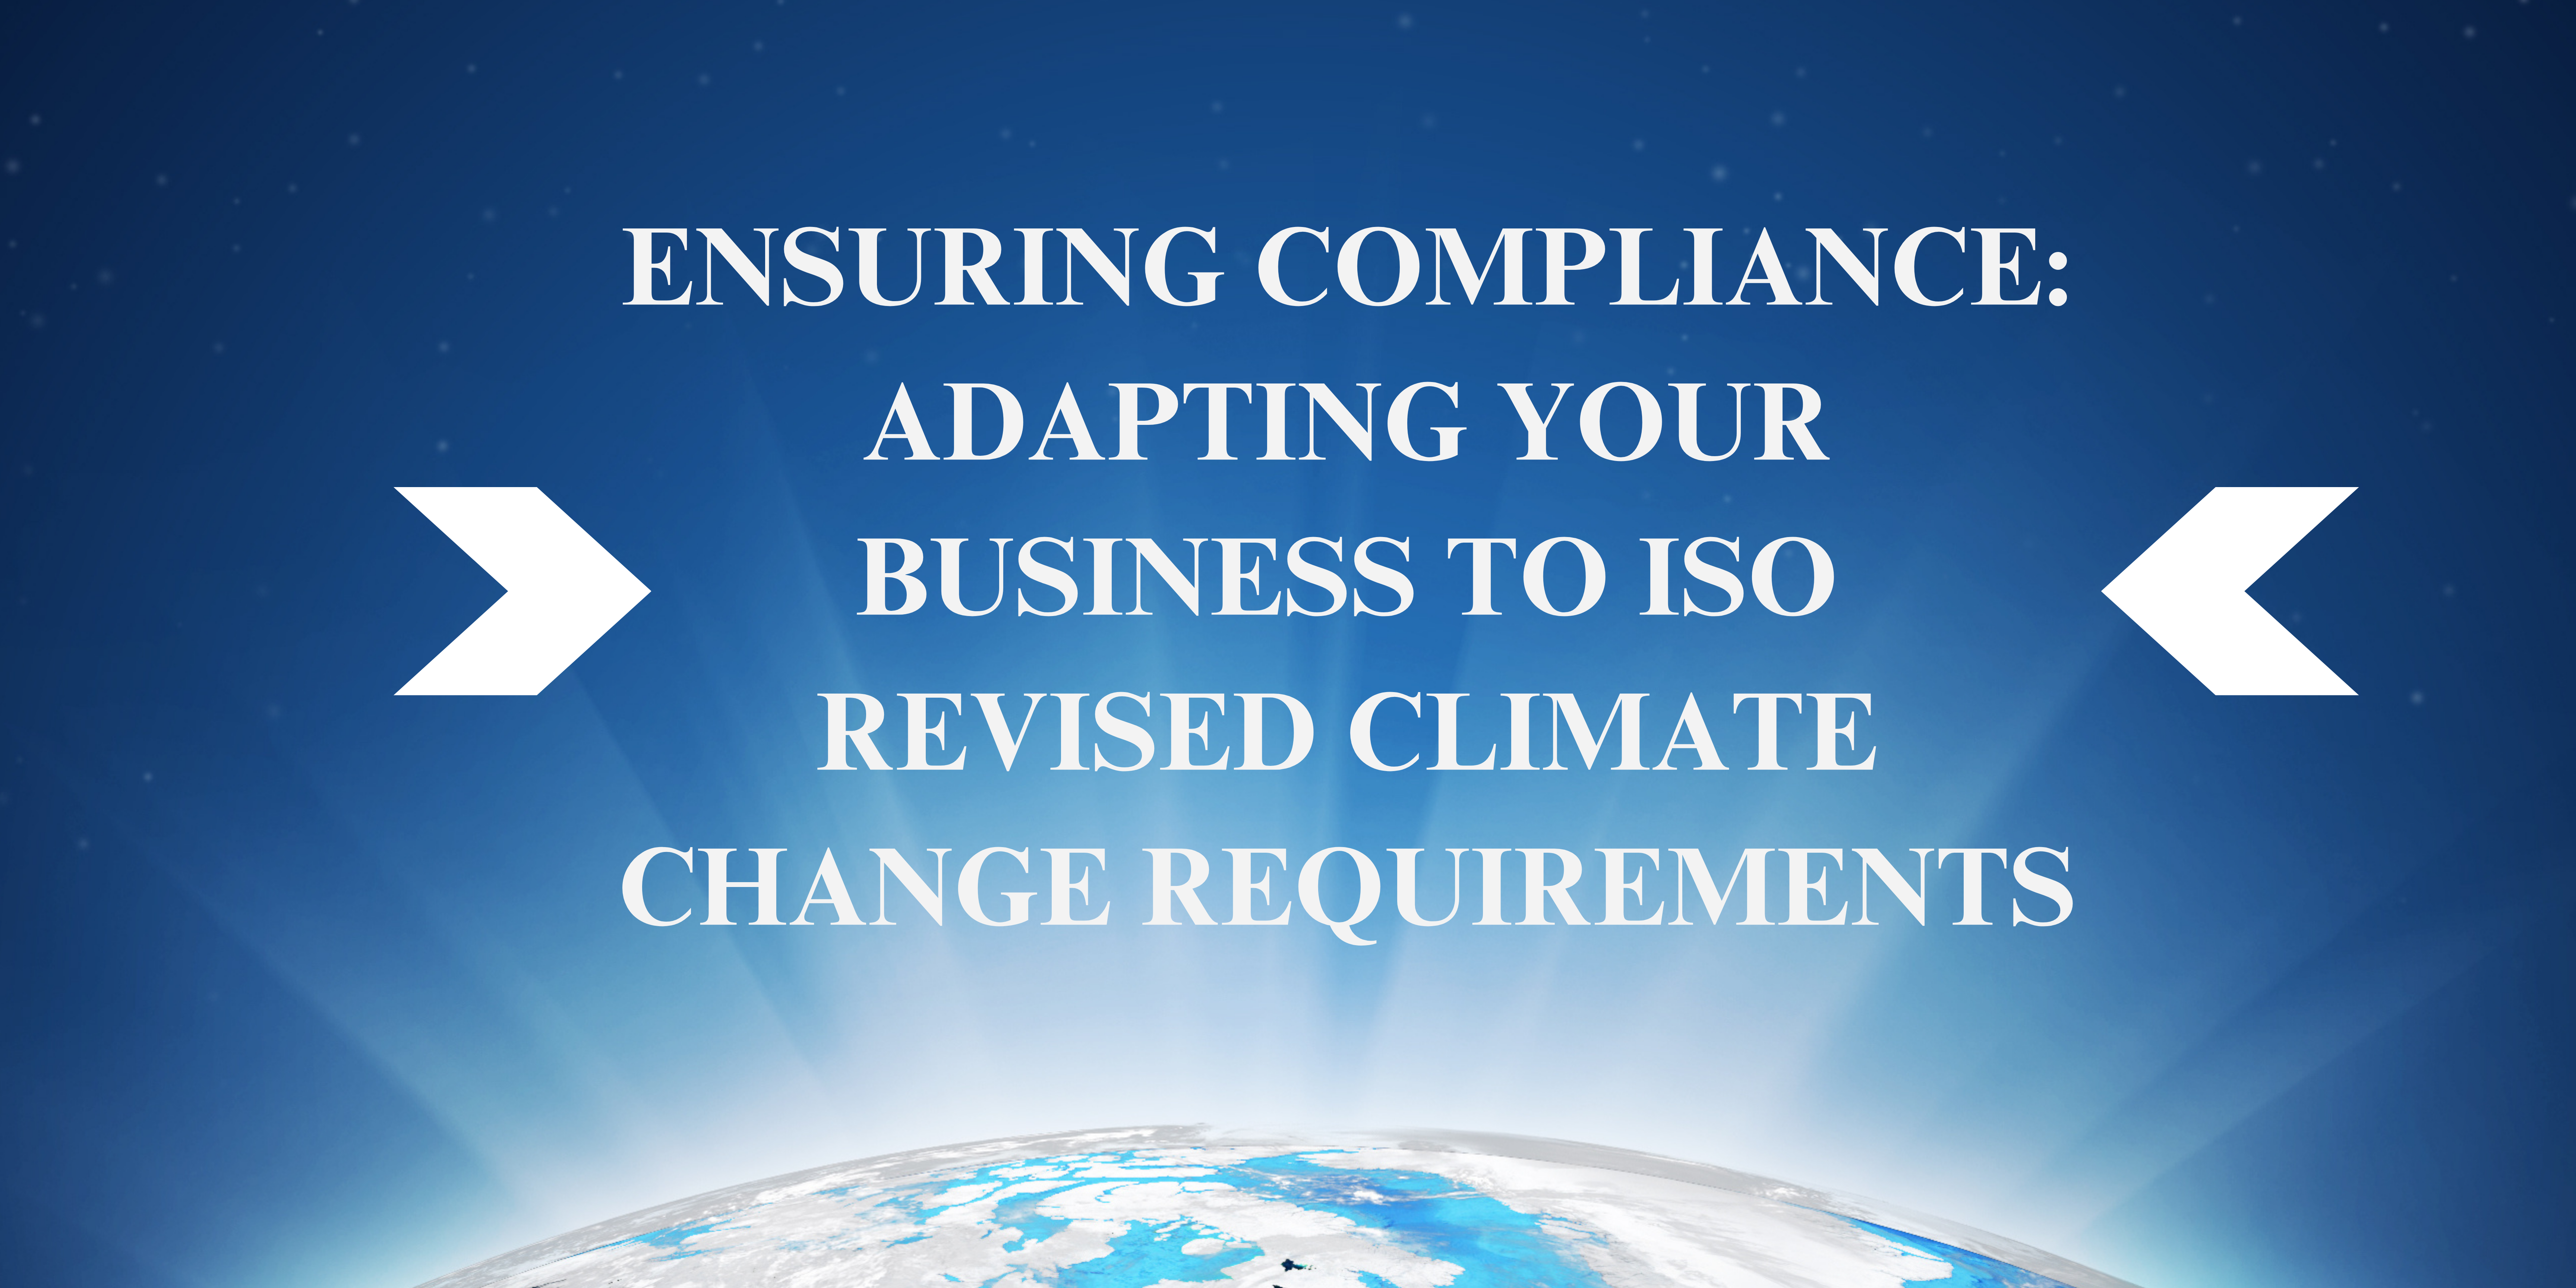 Ensuring Compliance Adapting Your Business to ISOs Revised Climate Change Requirements